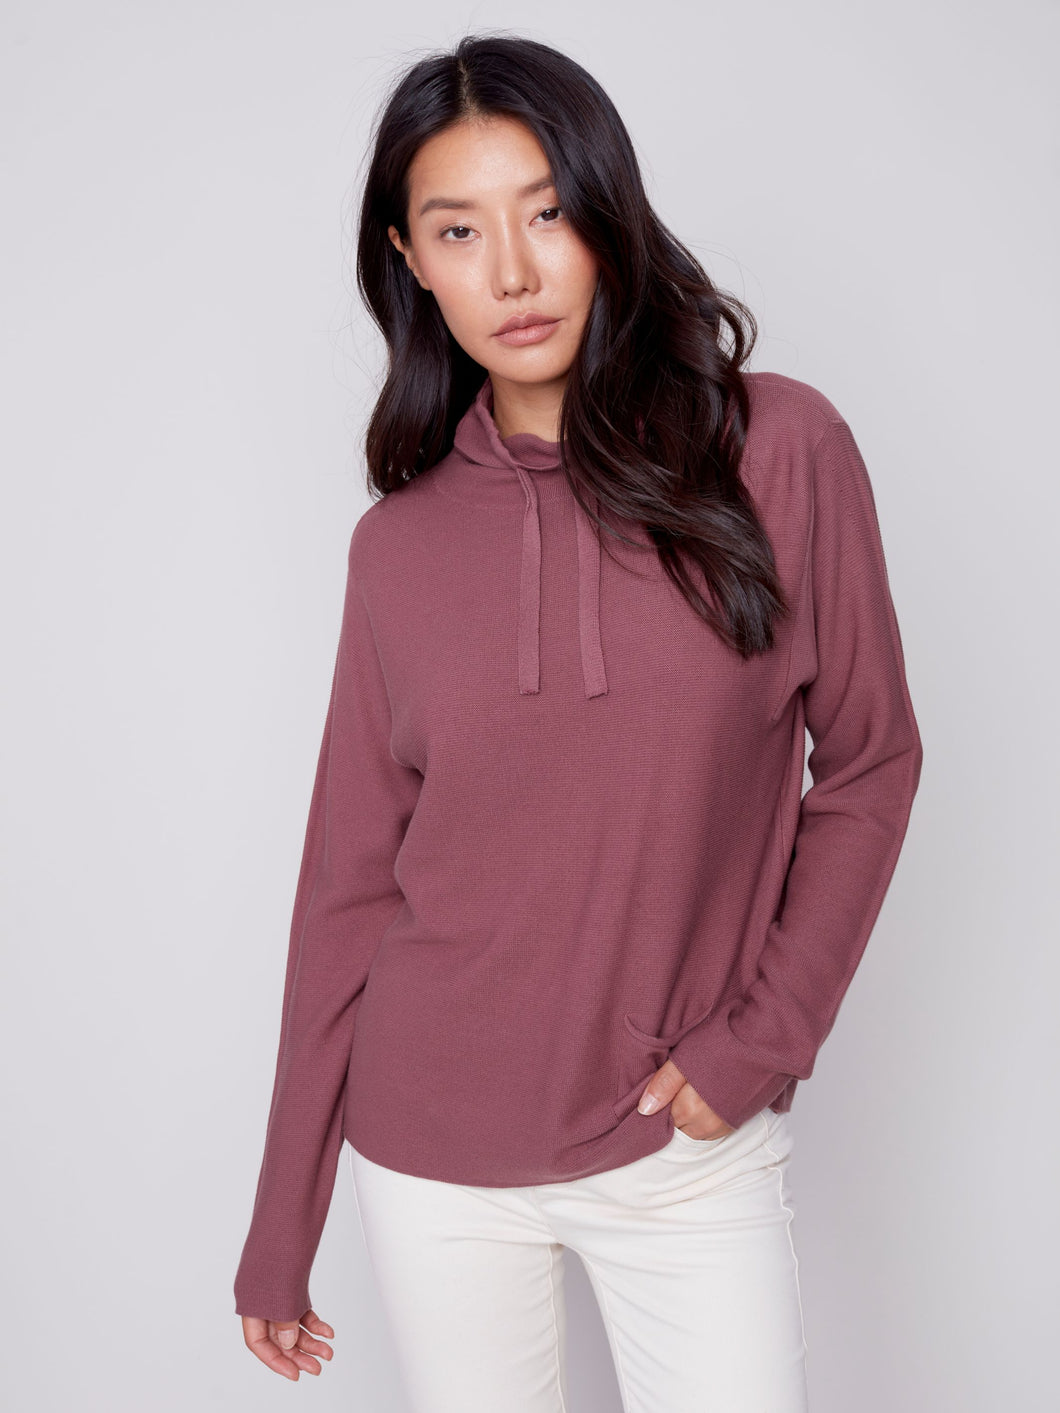 Charlie B Solid Ottoman Cotton Funnel Neck Raspberry Sweater With Pocket Detail - 100% Cotton